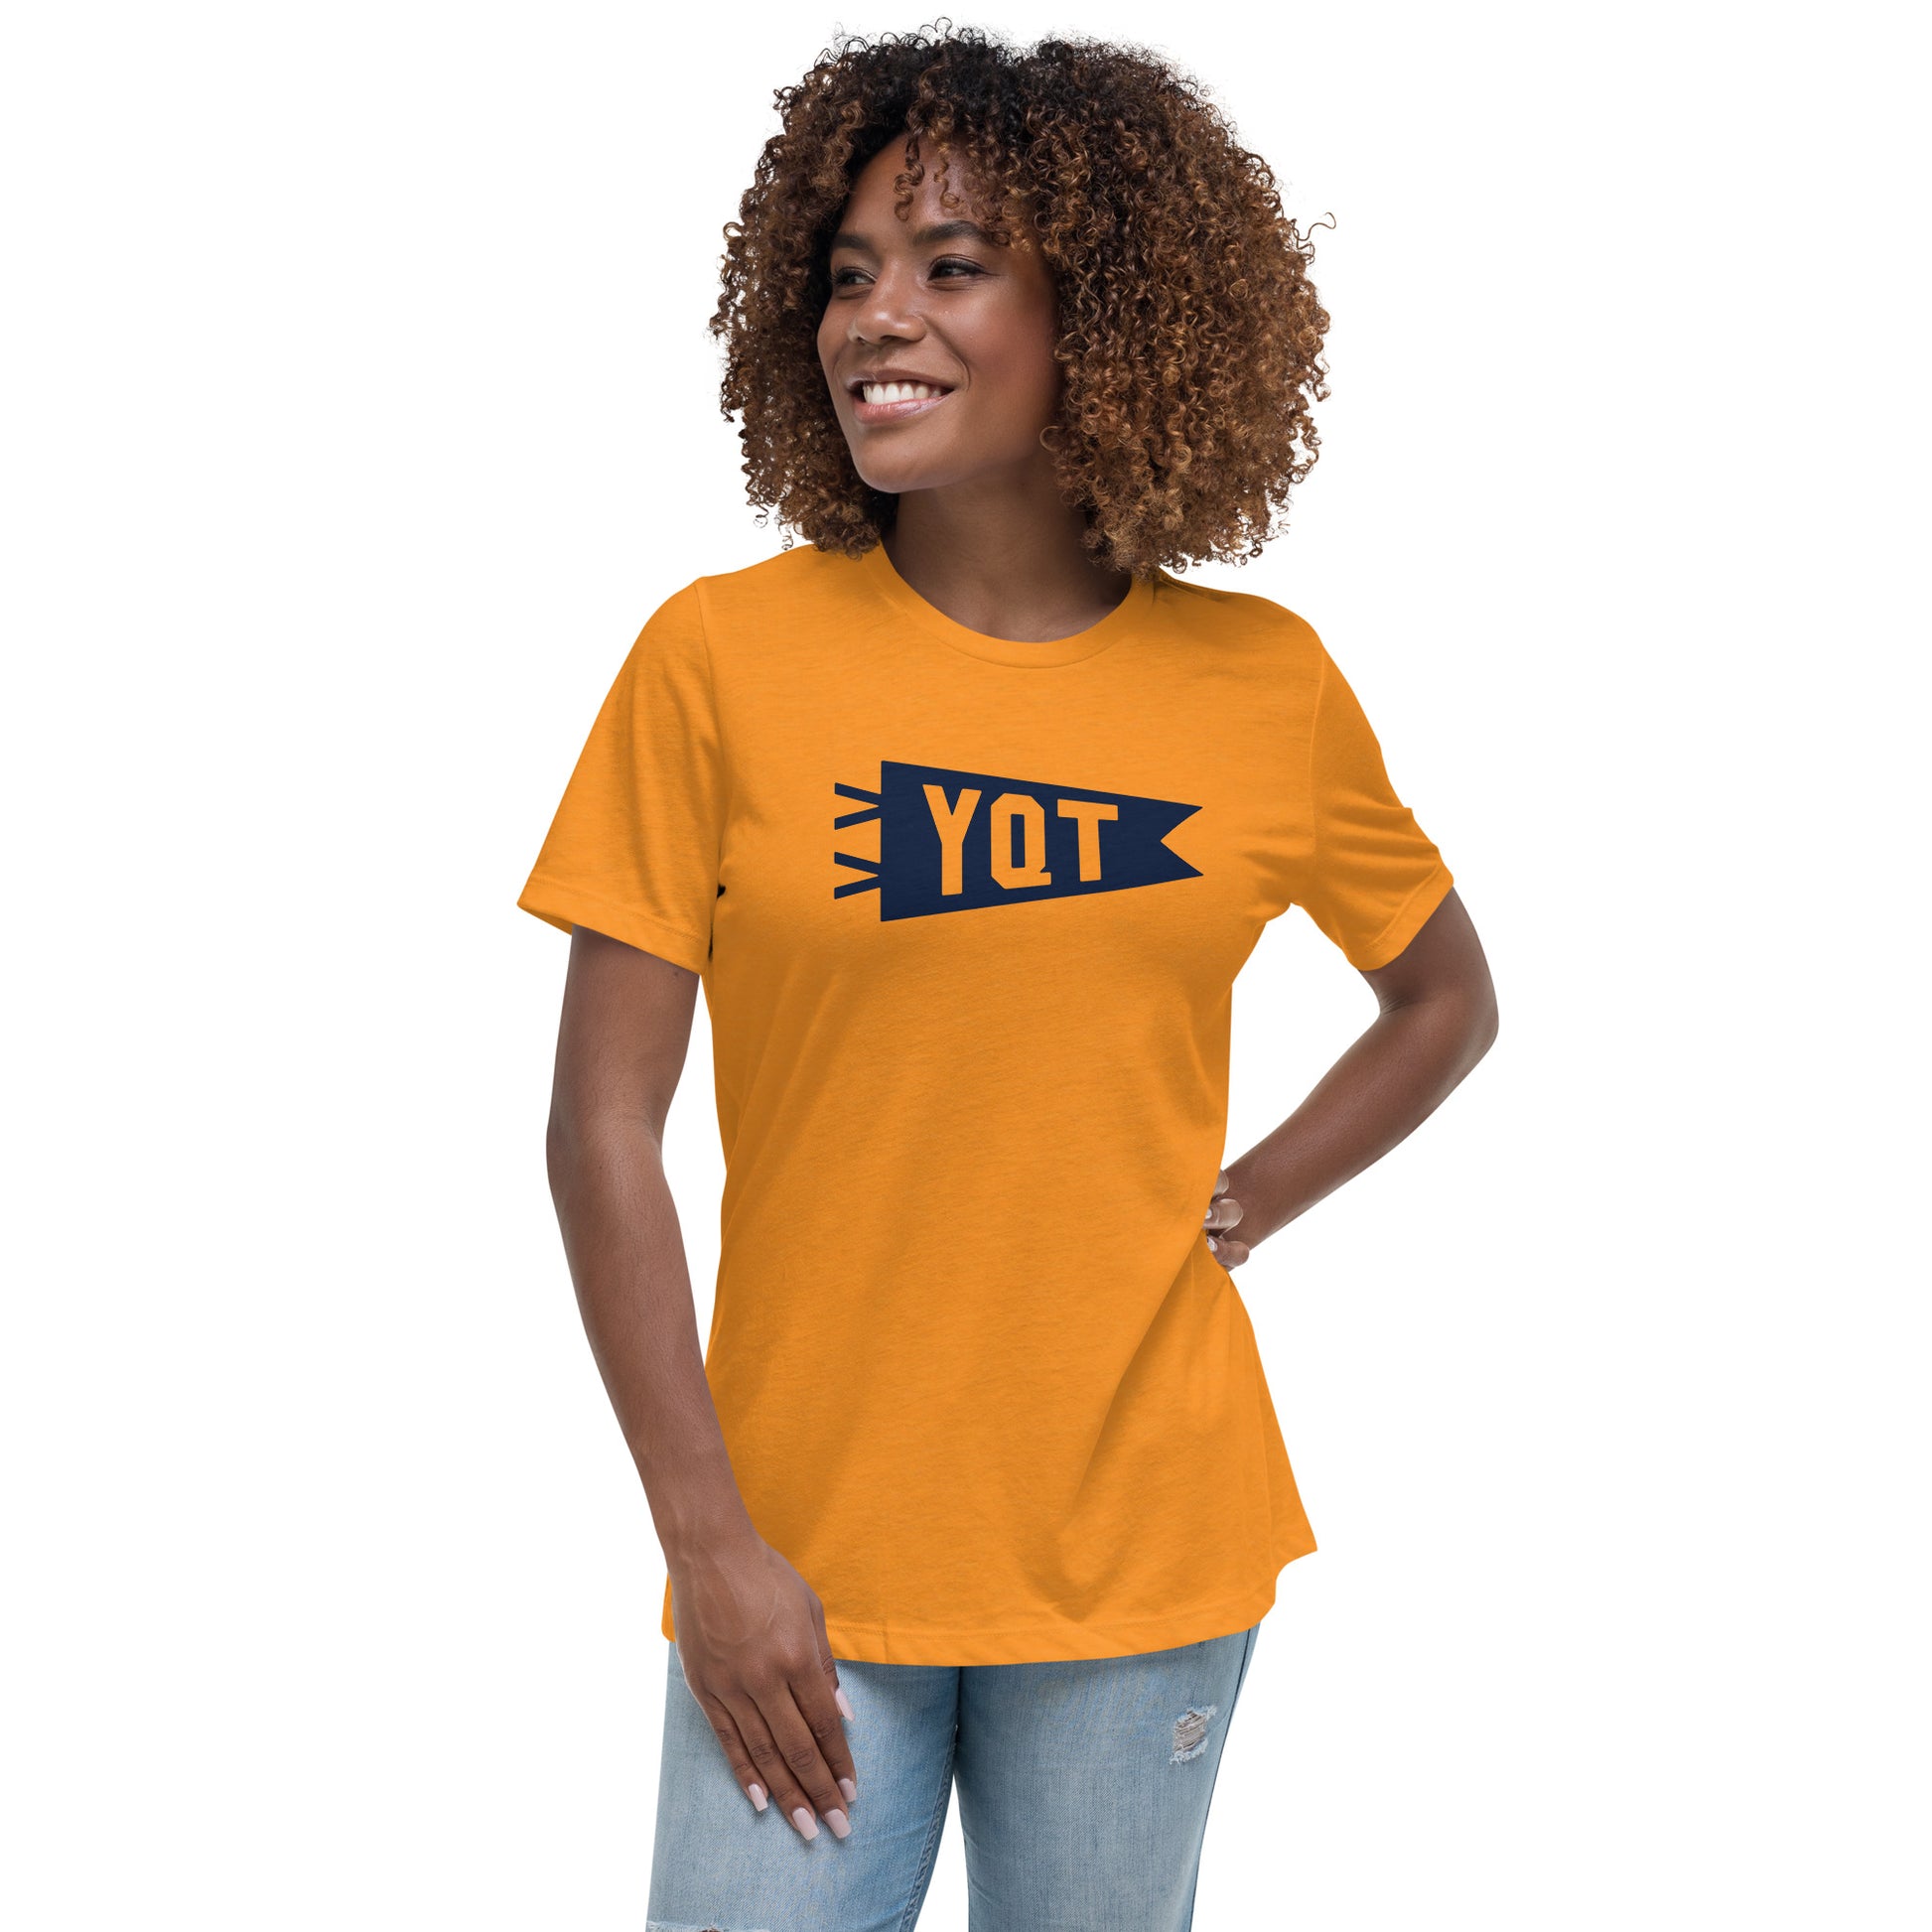 Airport Code Women's Tee - Navy Blue Graphic • YQT Thunder Bay • YHM Designs - Image 03